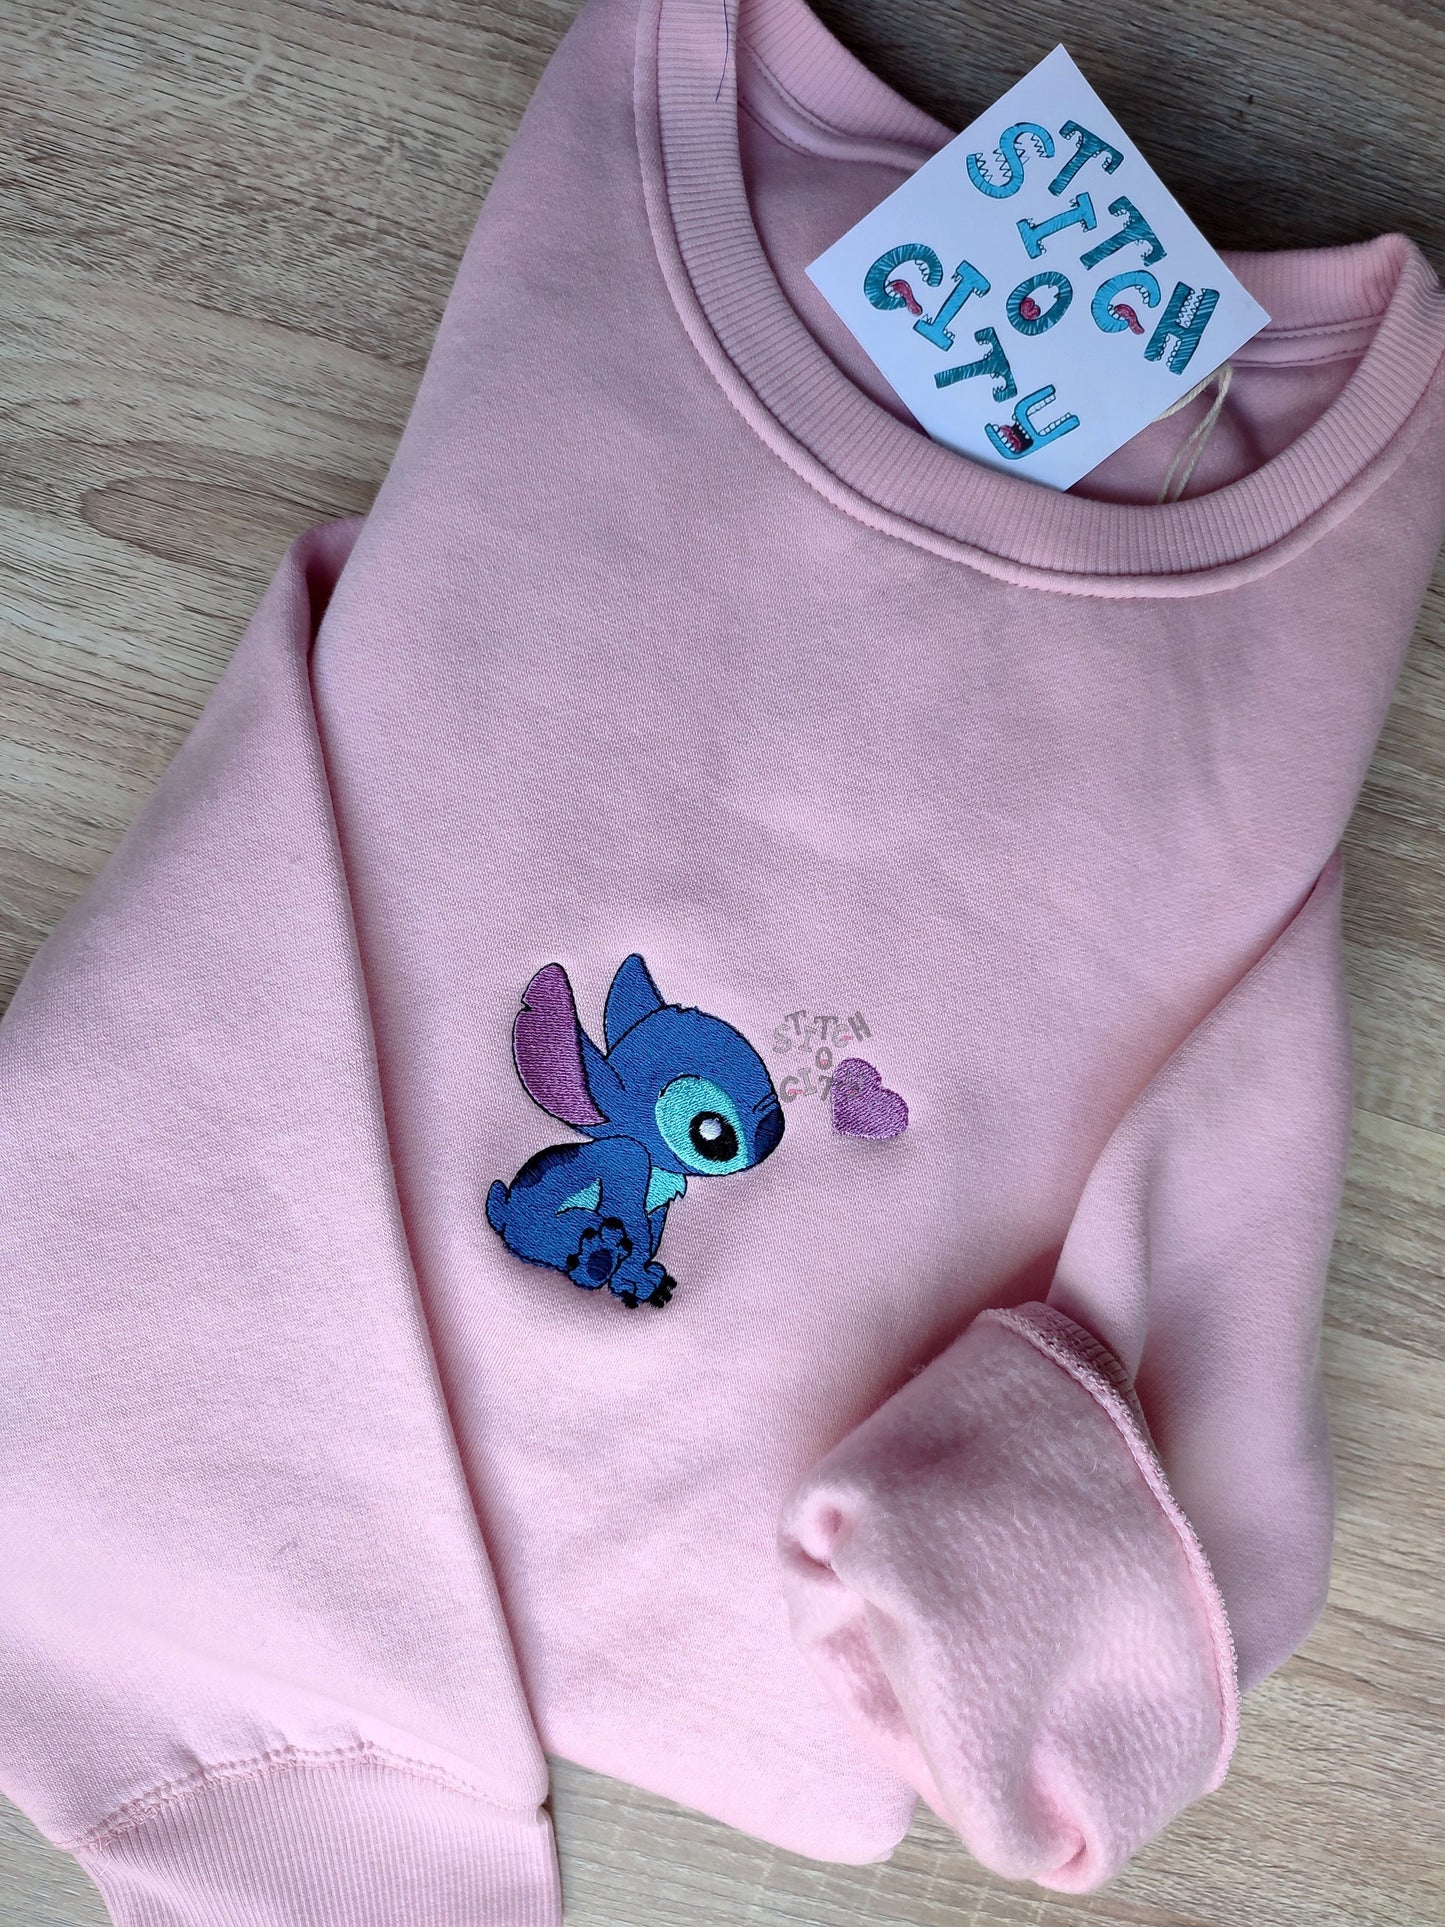 Embroidered lovely friends embroidered Sweatshirt, embroidered Hoodie, –  stitchocity.shop